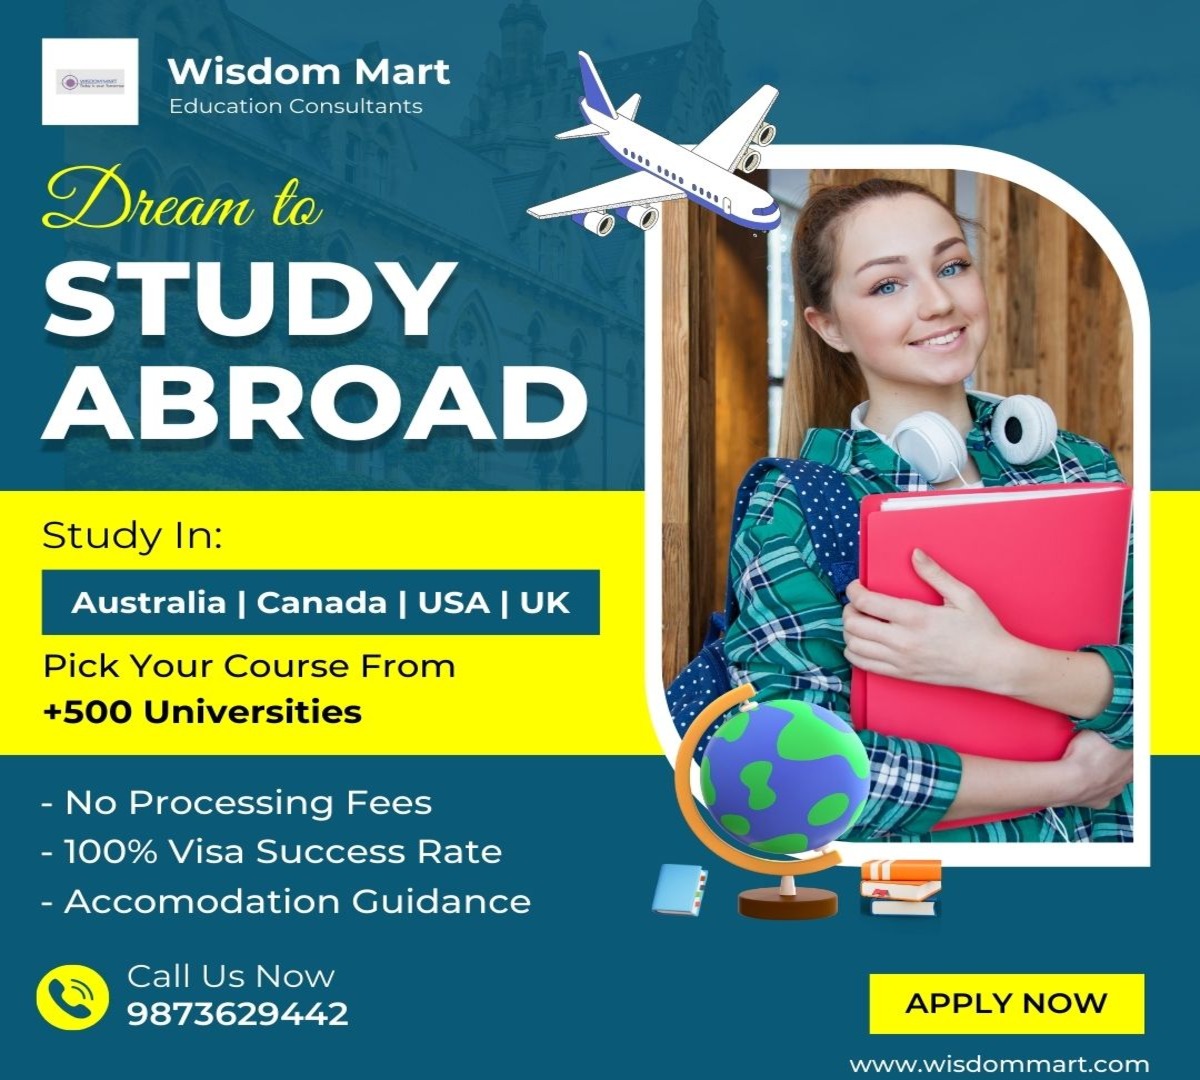 Wisdom Mart’s Insights on the Finest Overseas Education Consultants